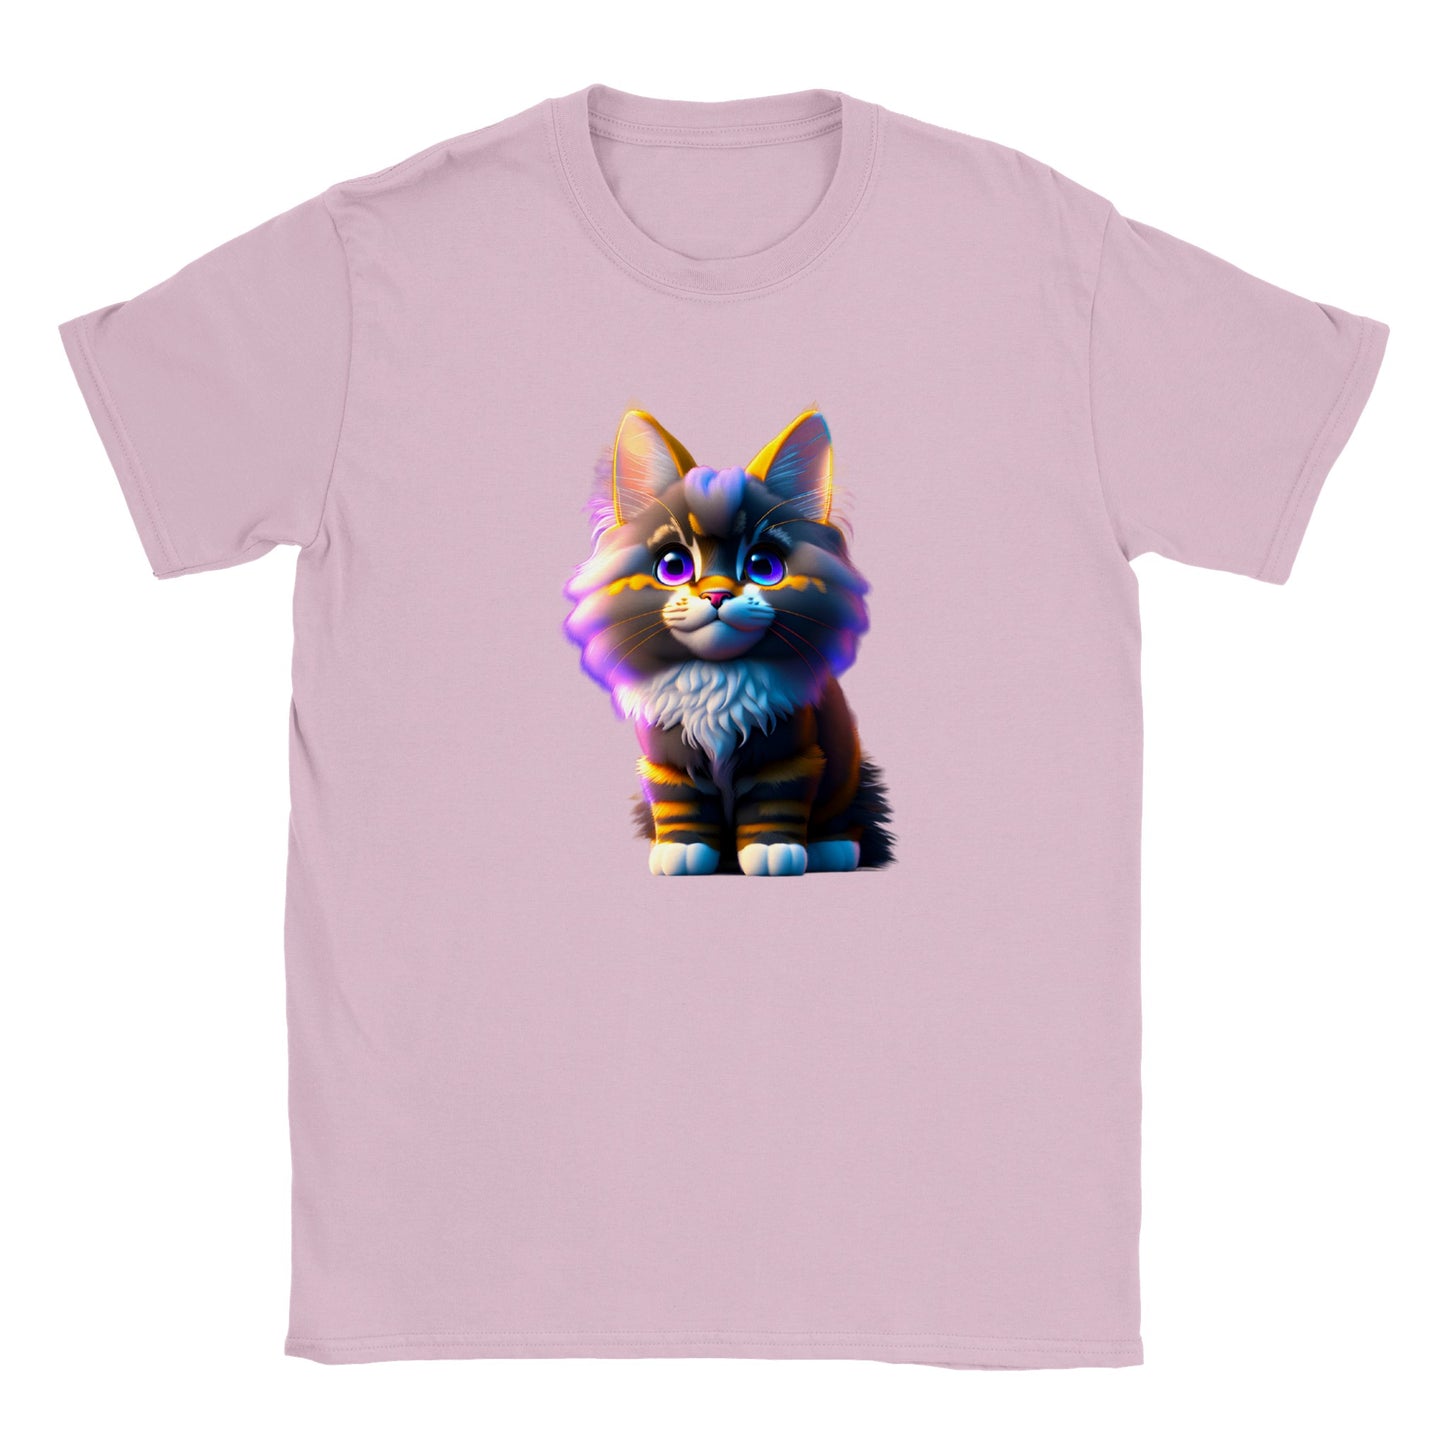 Adorable, Cool, Cute Cats and Kittens Toy - Classic Kids Crewneck T-Shirt 18